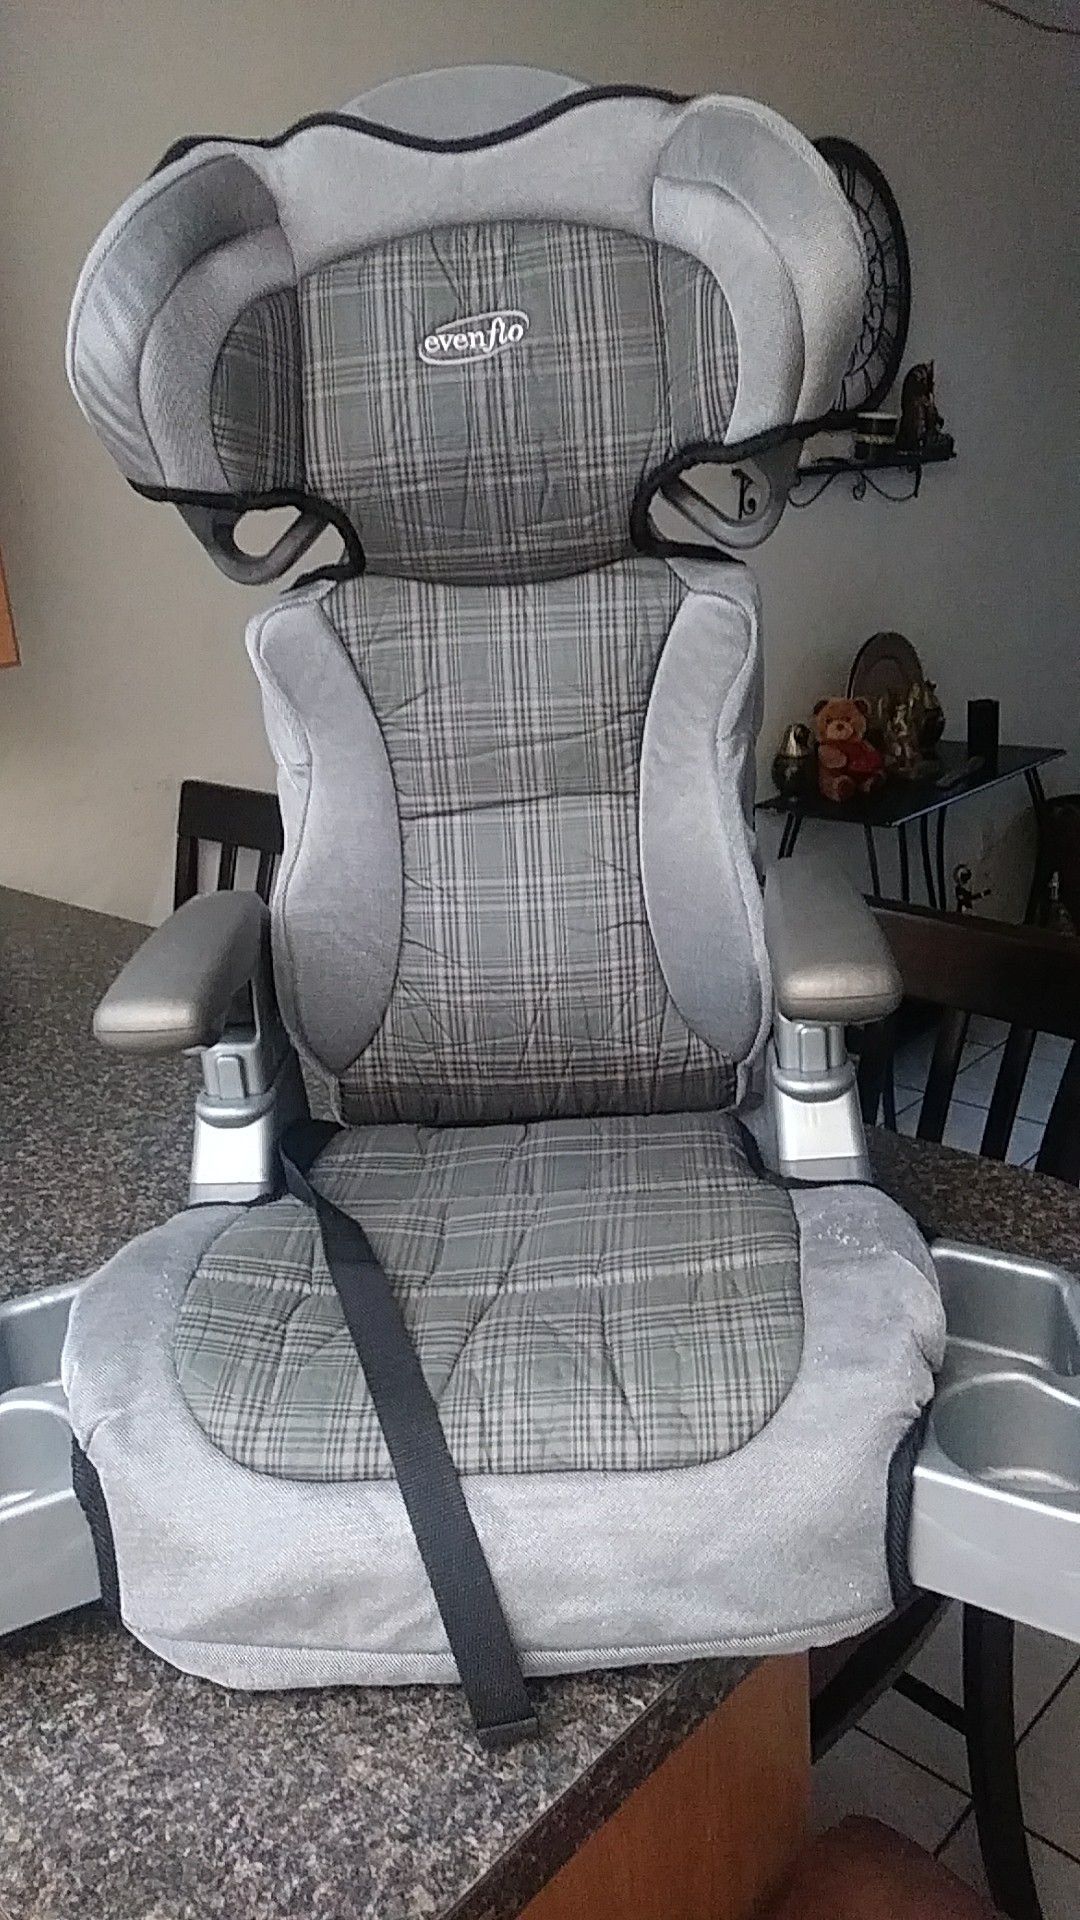 Grey evenflo booster seat